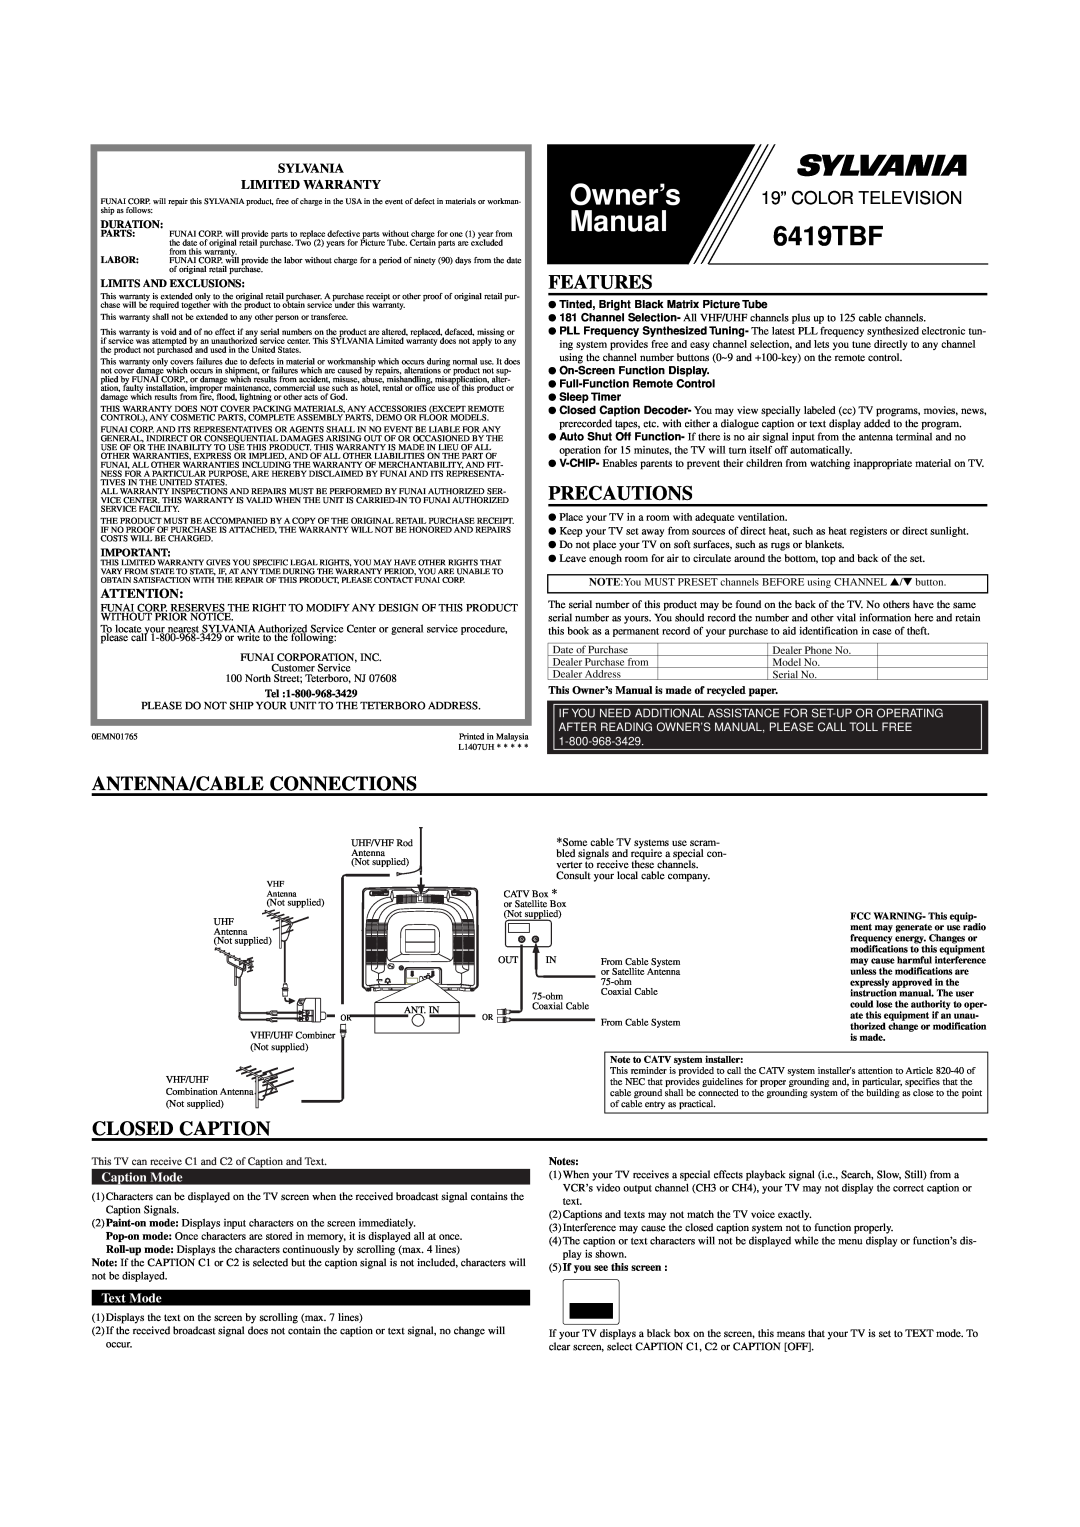 Sylvania 6419TBF owner manual Features, Precautions, Antenna/Cable Connections, Closed Caption, Sylvania Limited Warranty 